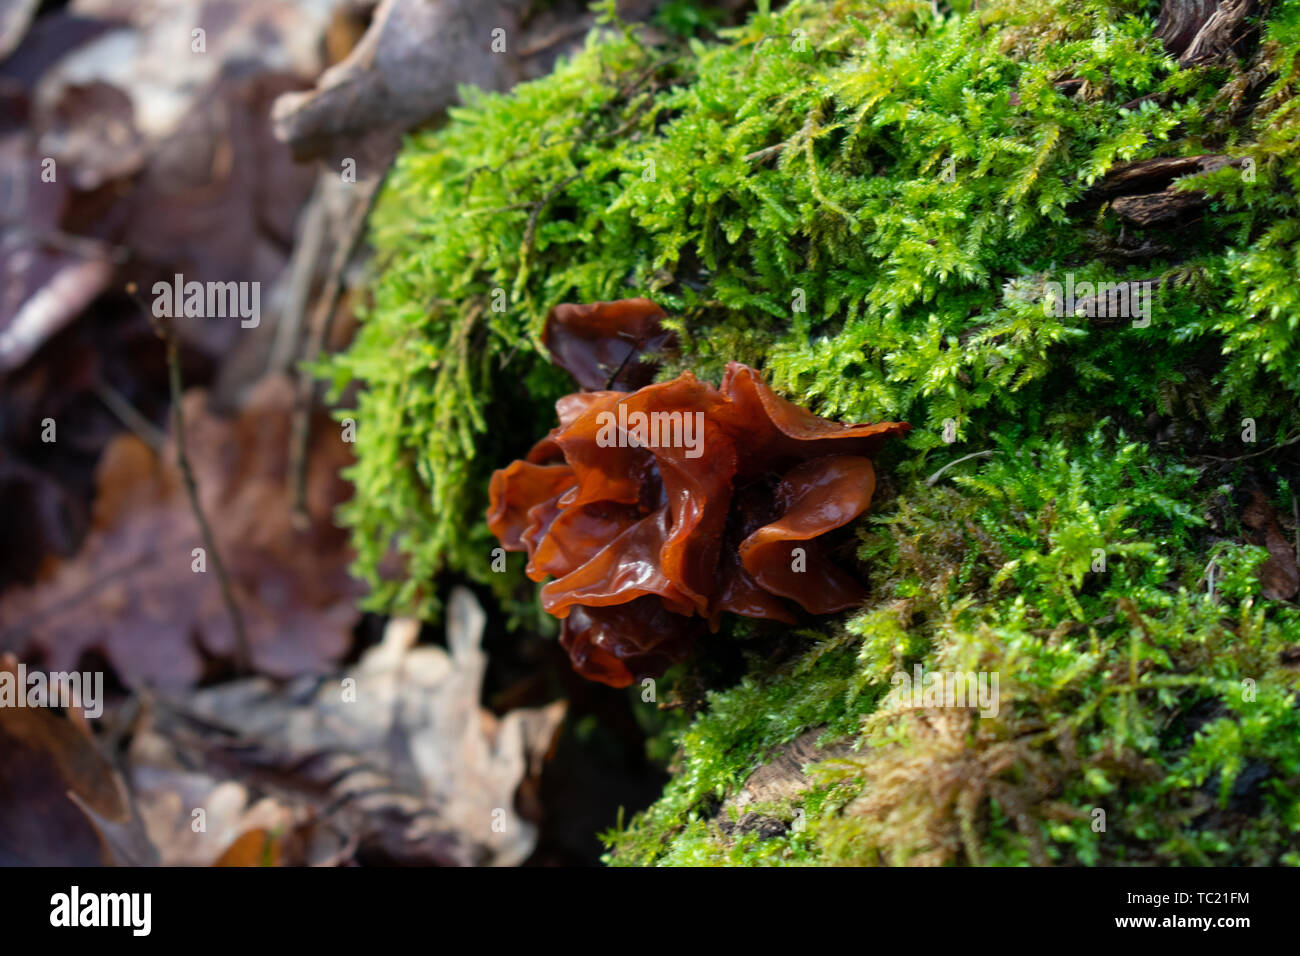 Closeup of brown mushroom on mossbed Stock Photo